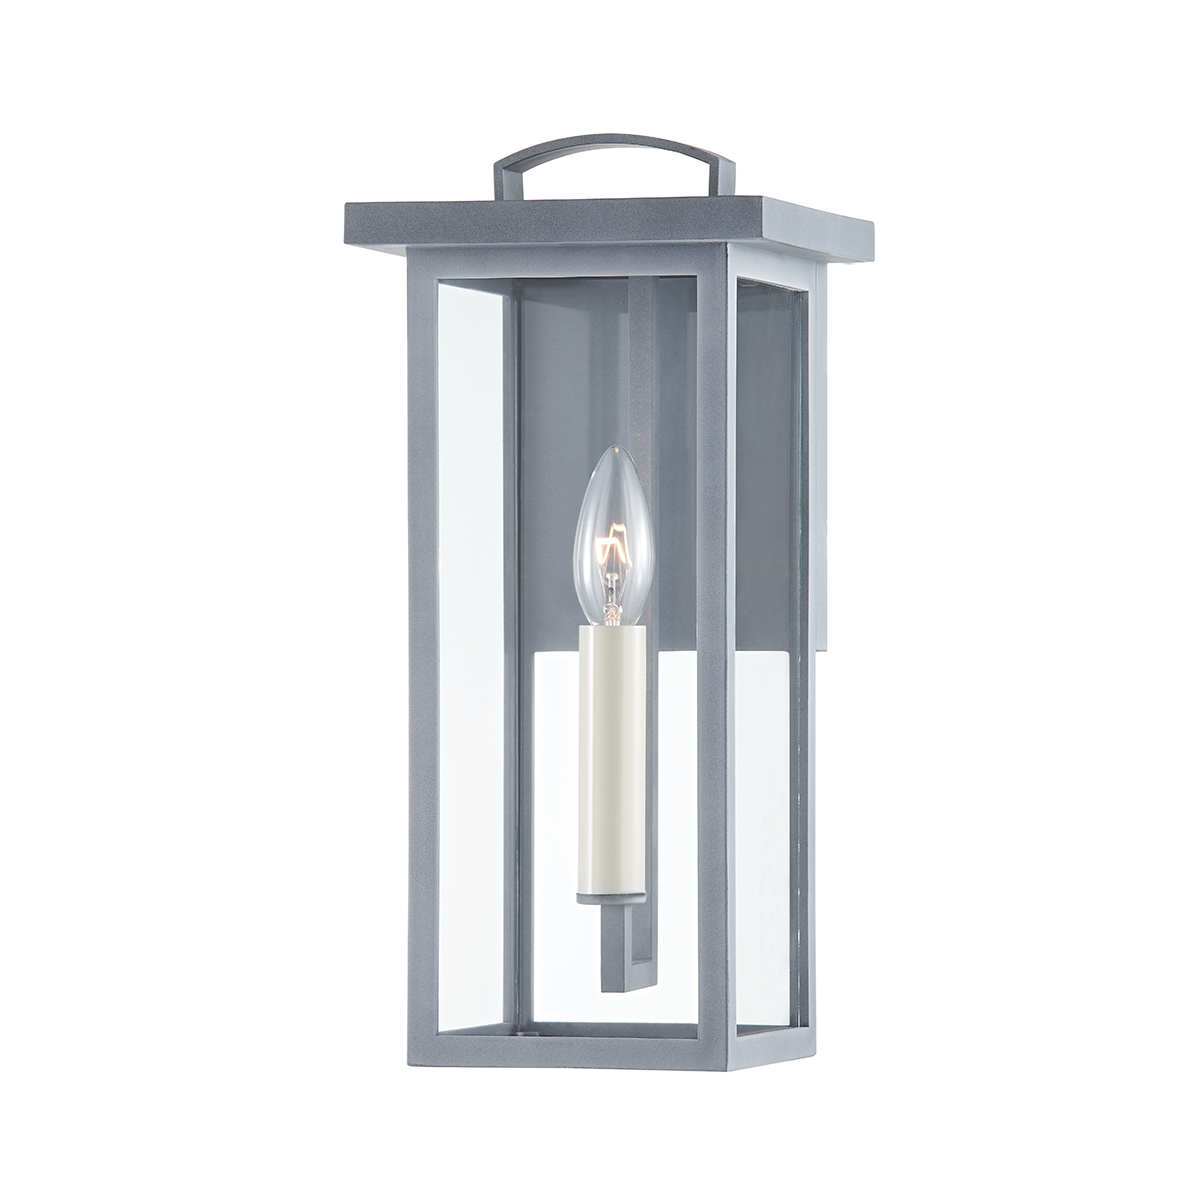 Troy EDEN 1 LIGHT SMALL EXTERIOR WALL SCONCE B7521 Outdoor l Wall Troy Lighting   